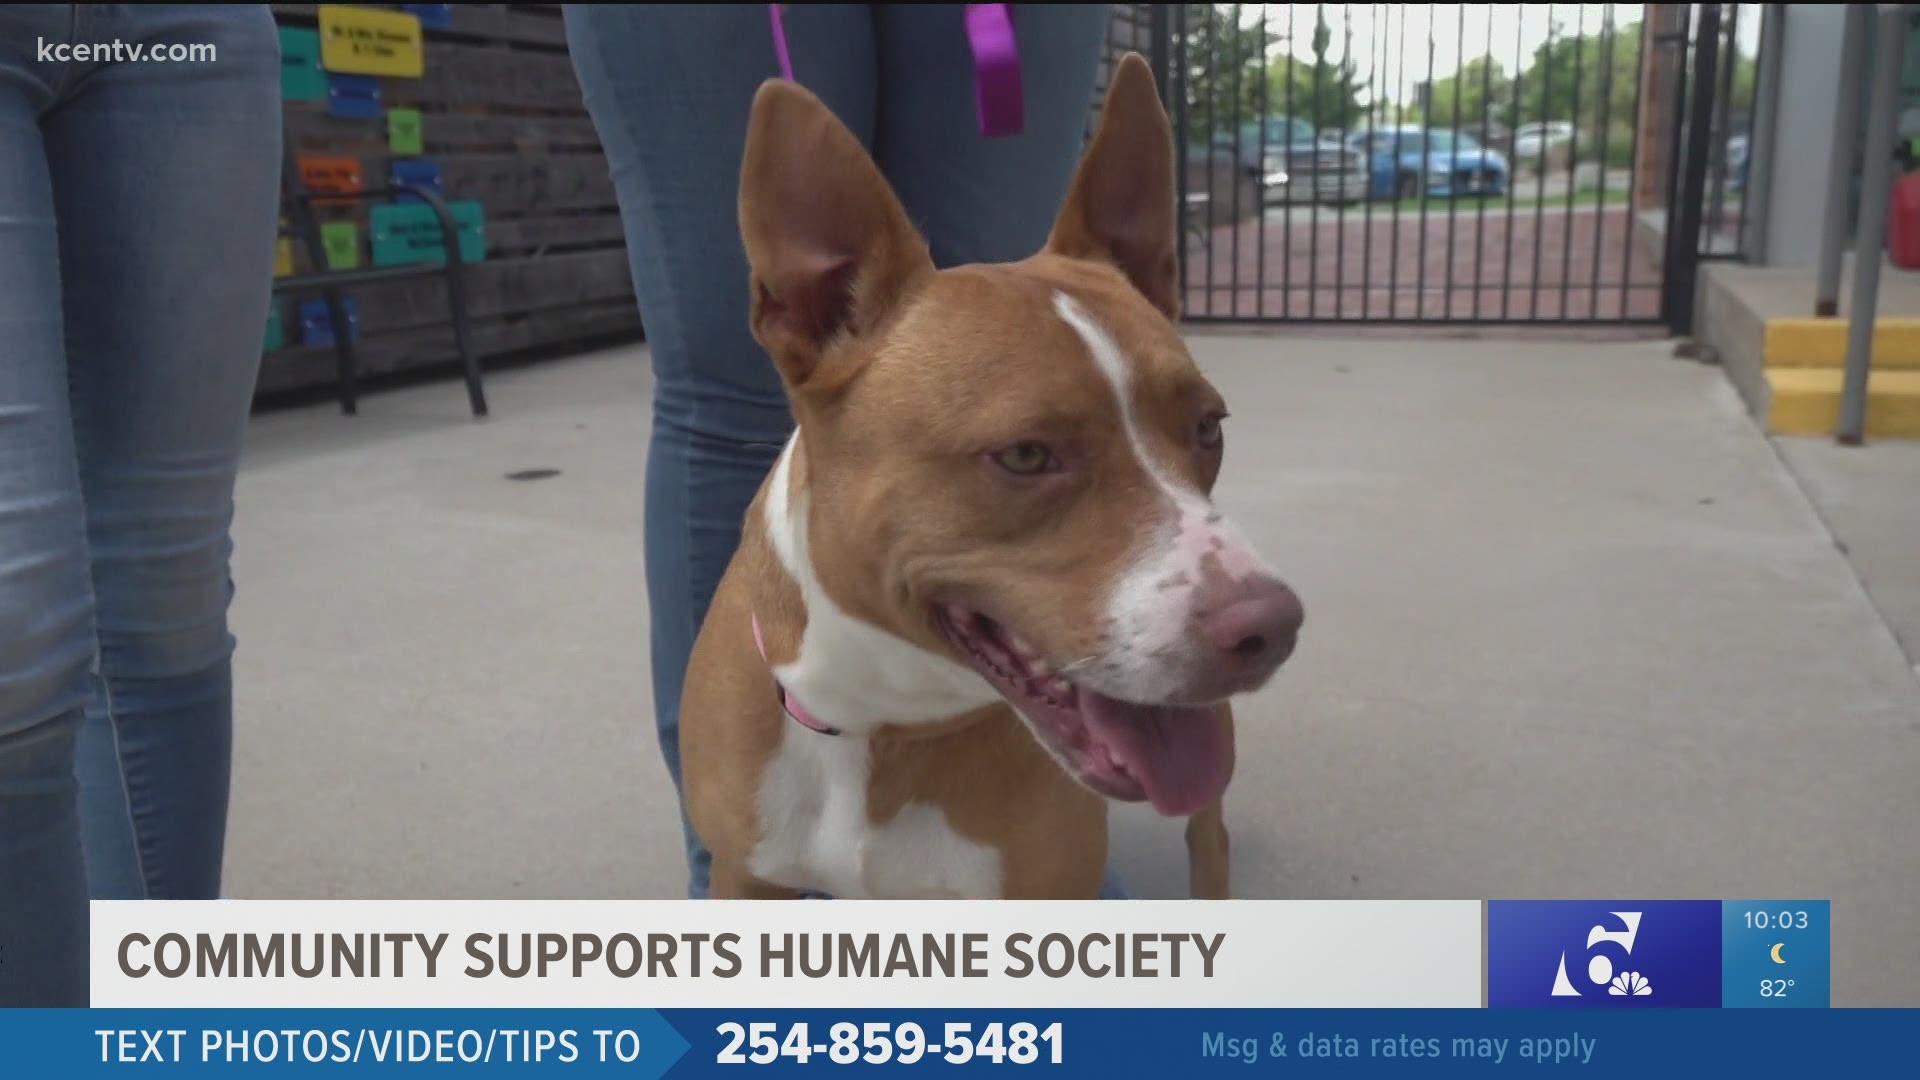 The humane society was happy to see so many adoptions, but said they may be at capacity again fairly soon.